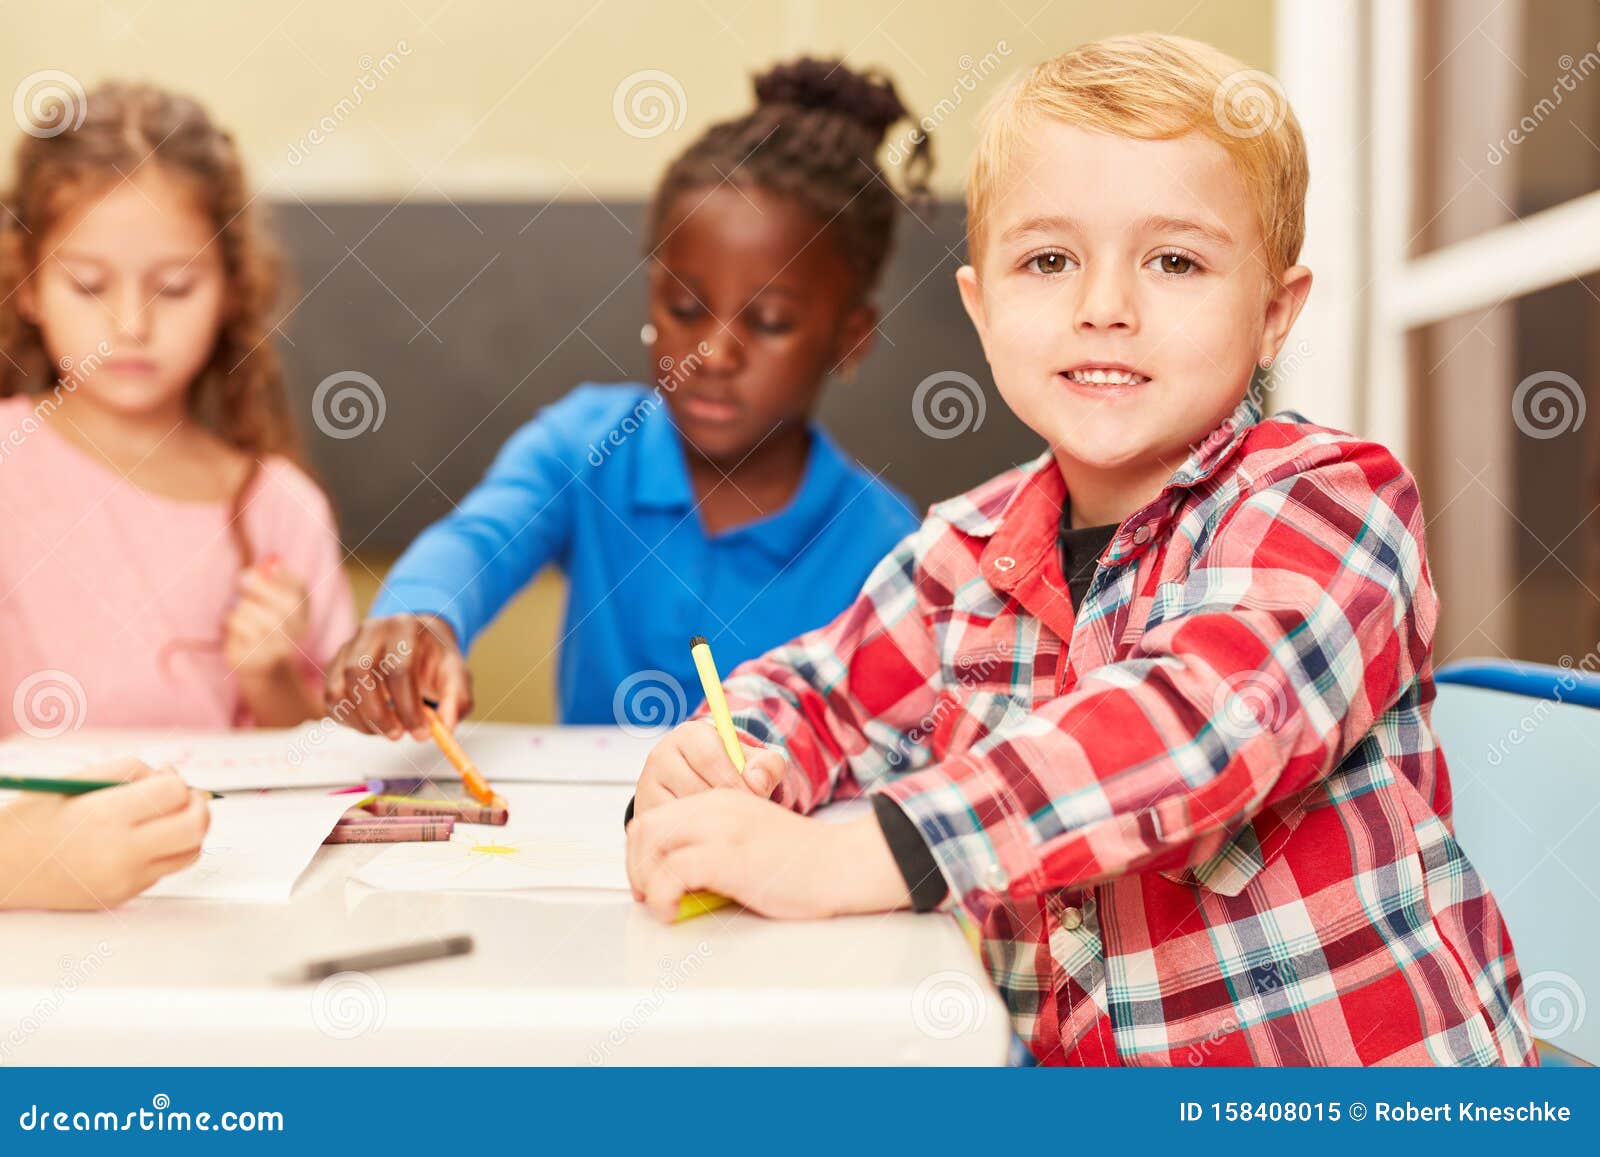 Boy As a Pupil or Preschooler while Painting Stock Image - Image of ...